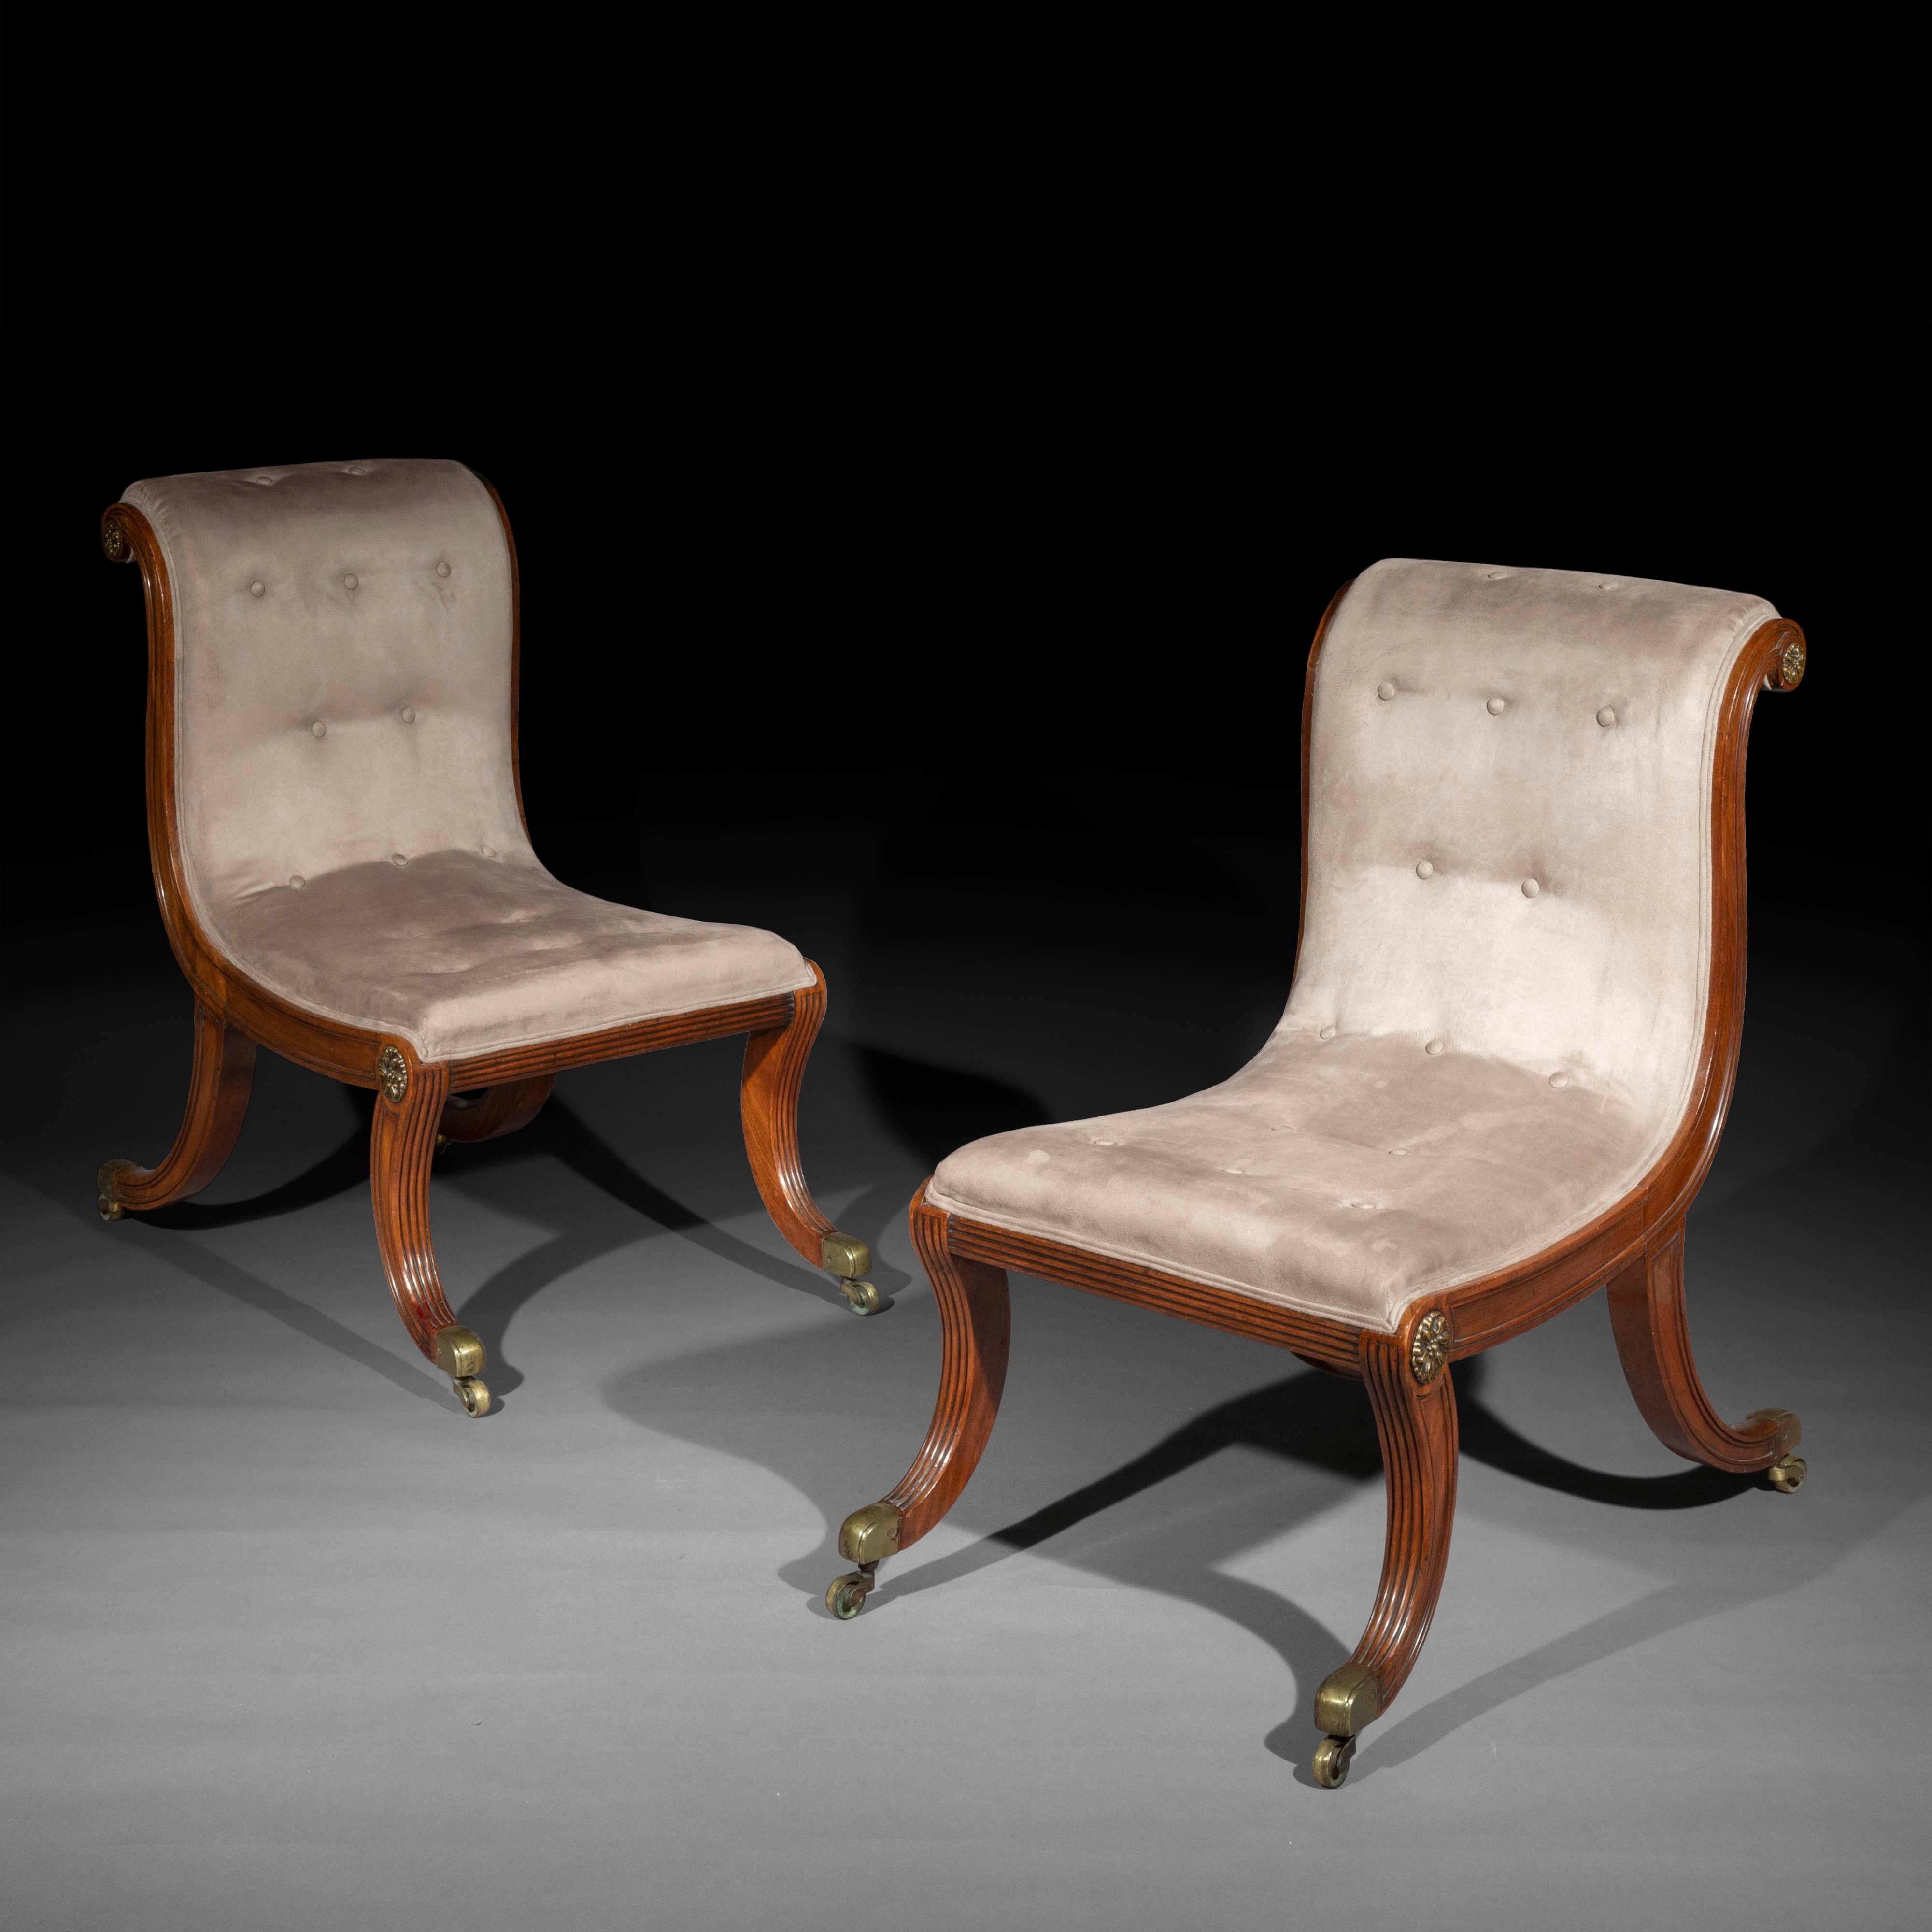 Carved Pair of Antique Regency Klismos Chairs, Designed by Thomas Hope